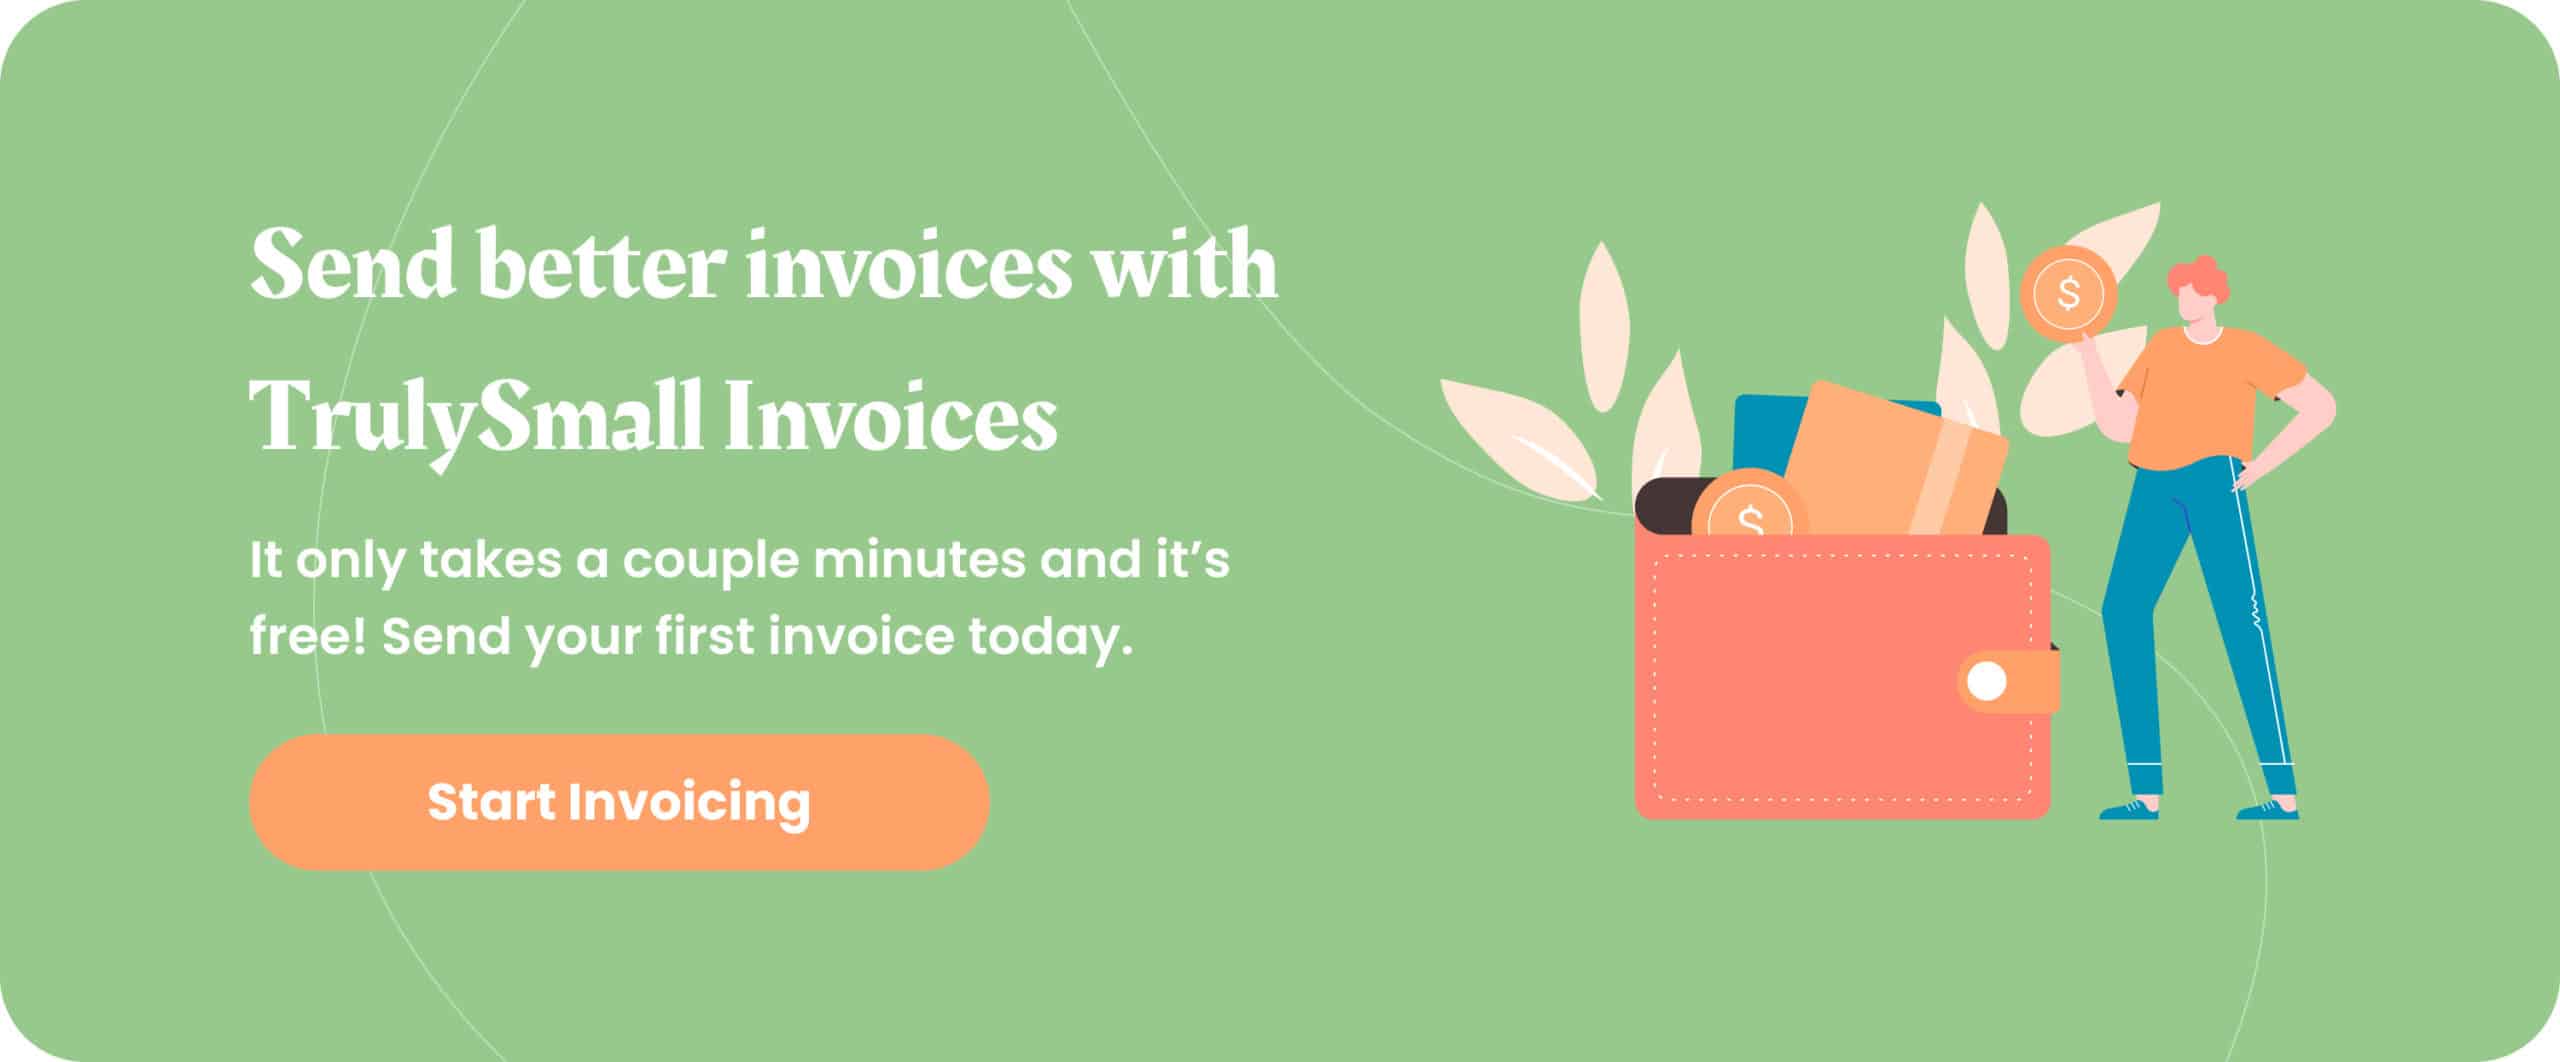 Send free invoices with trulysmall